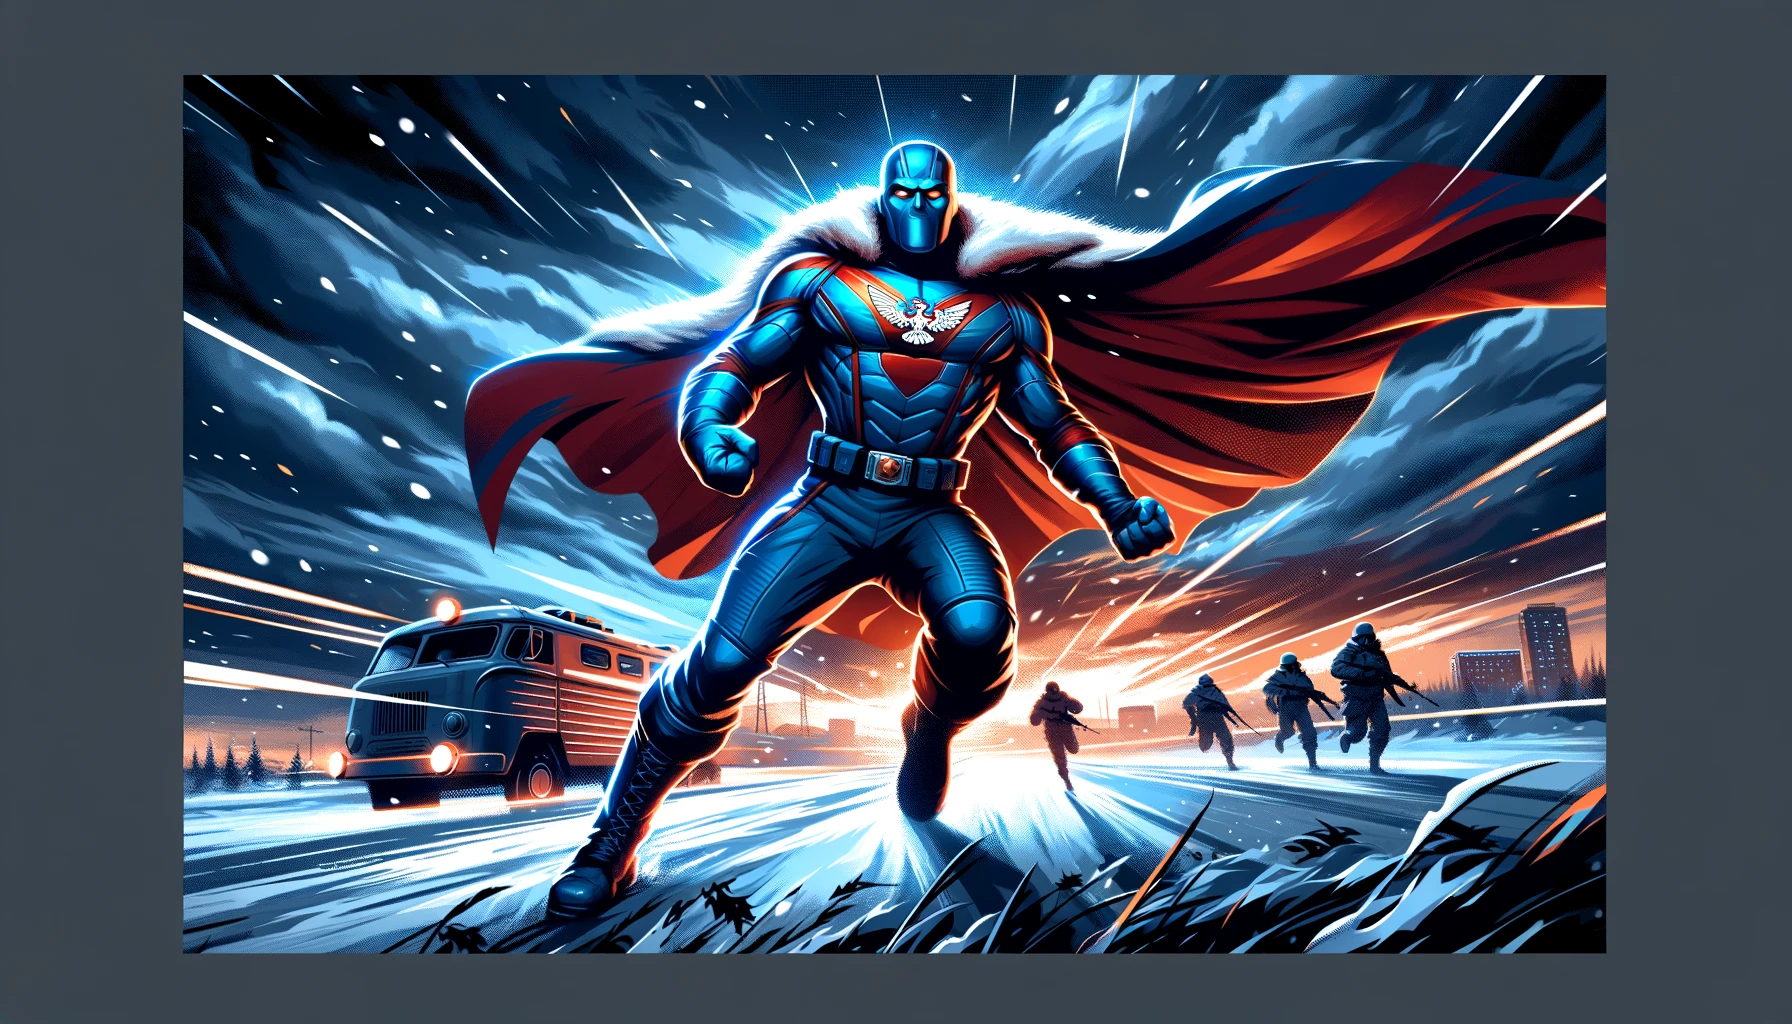 A Red Guardian with a red and blue cape walks decisively along a snowy street, silhouettes of military personnel in the distance.